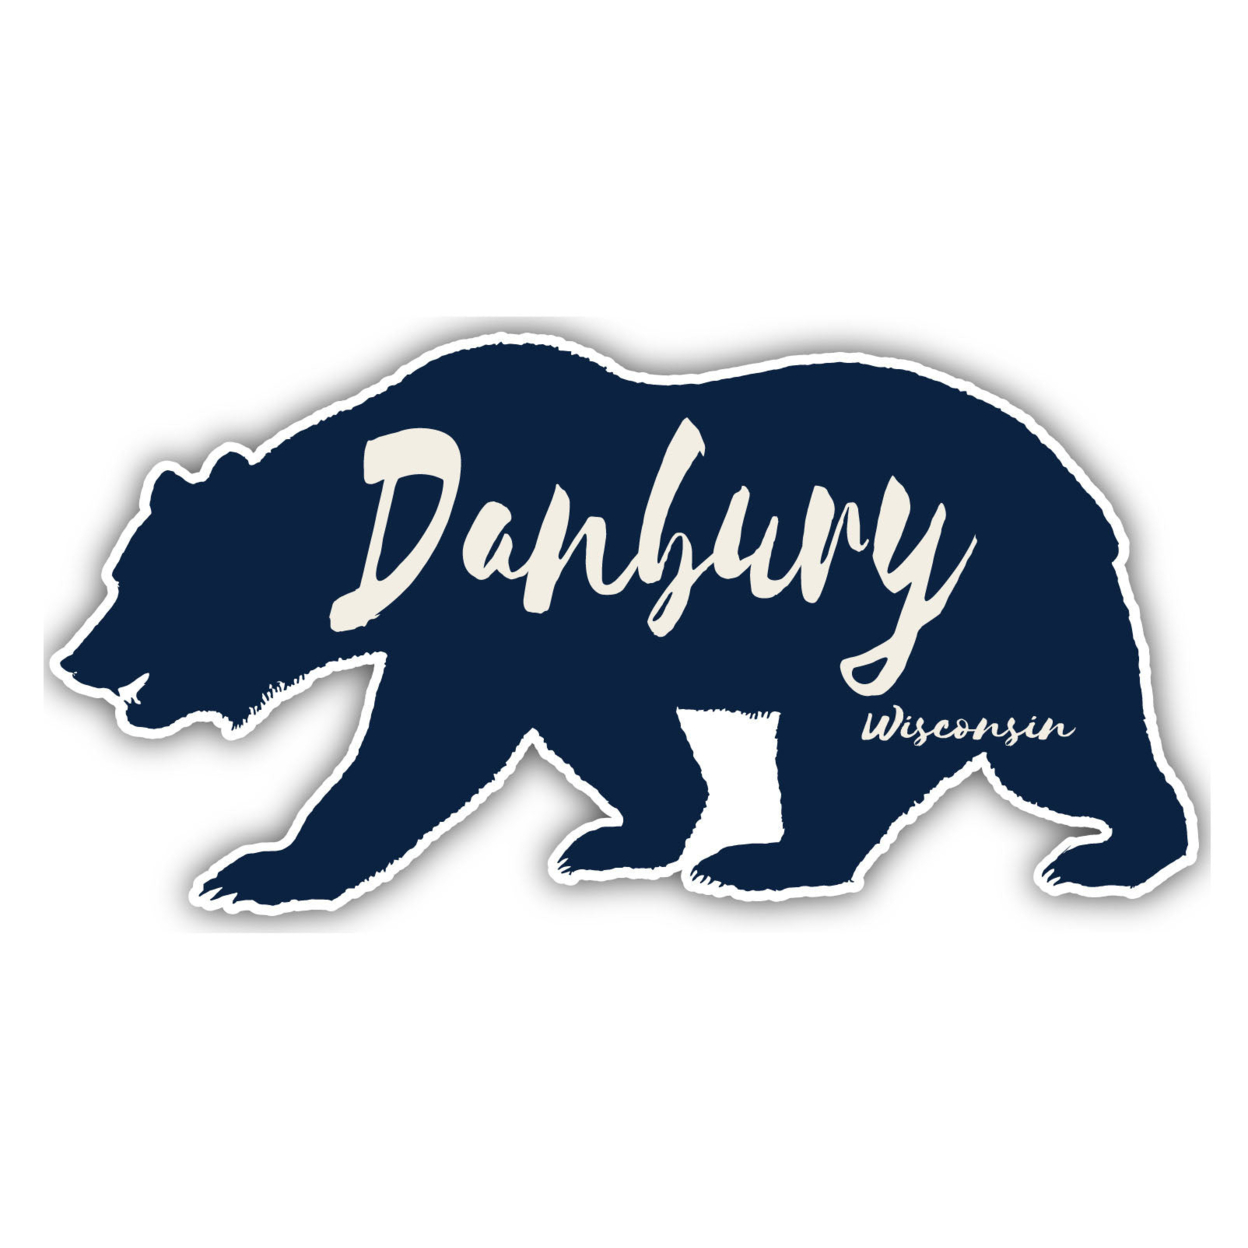 Danbury Wisconsin Souvenir Decorative Stickers (Choose Theme And Size) - 4-Pack, 12-Inch, Bear